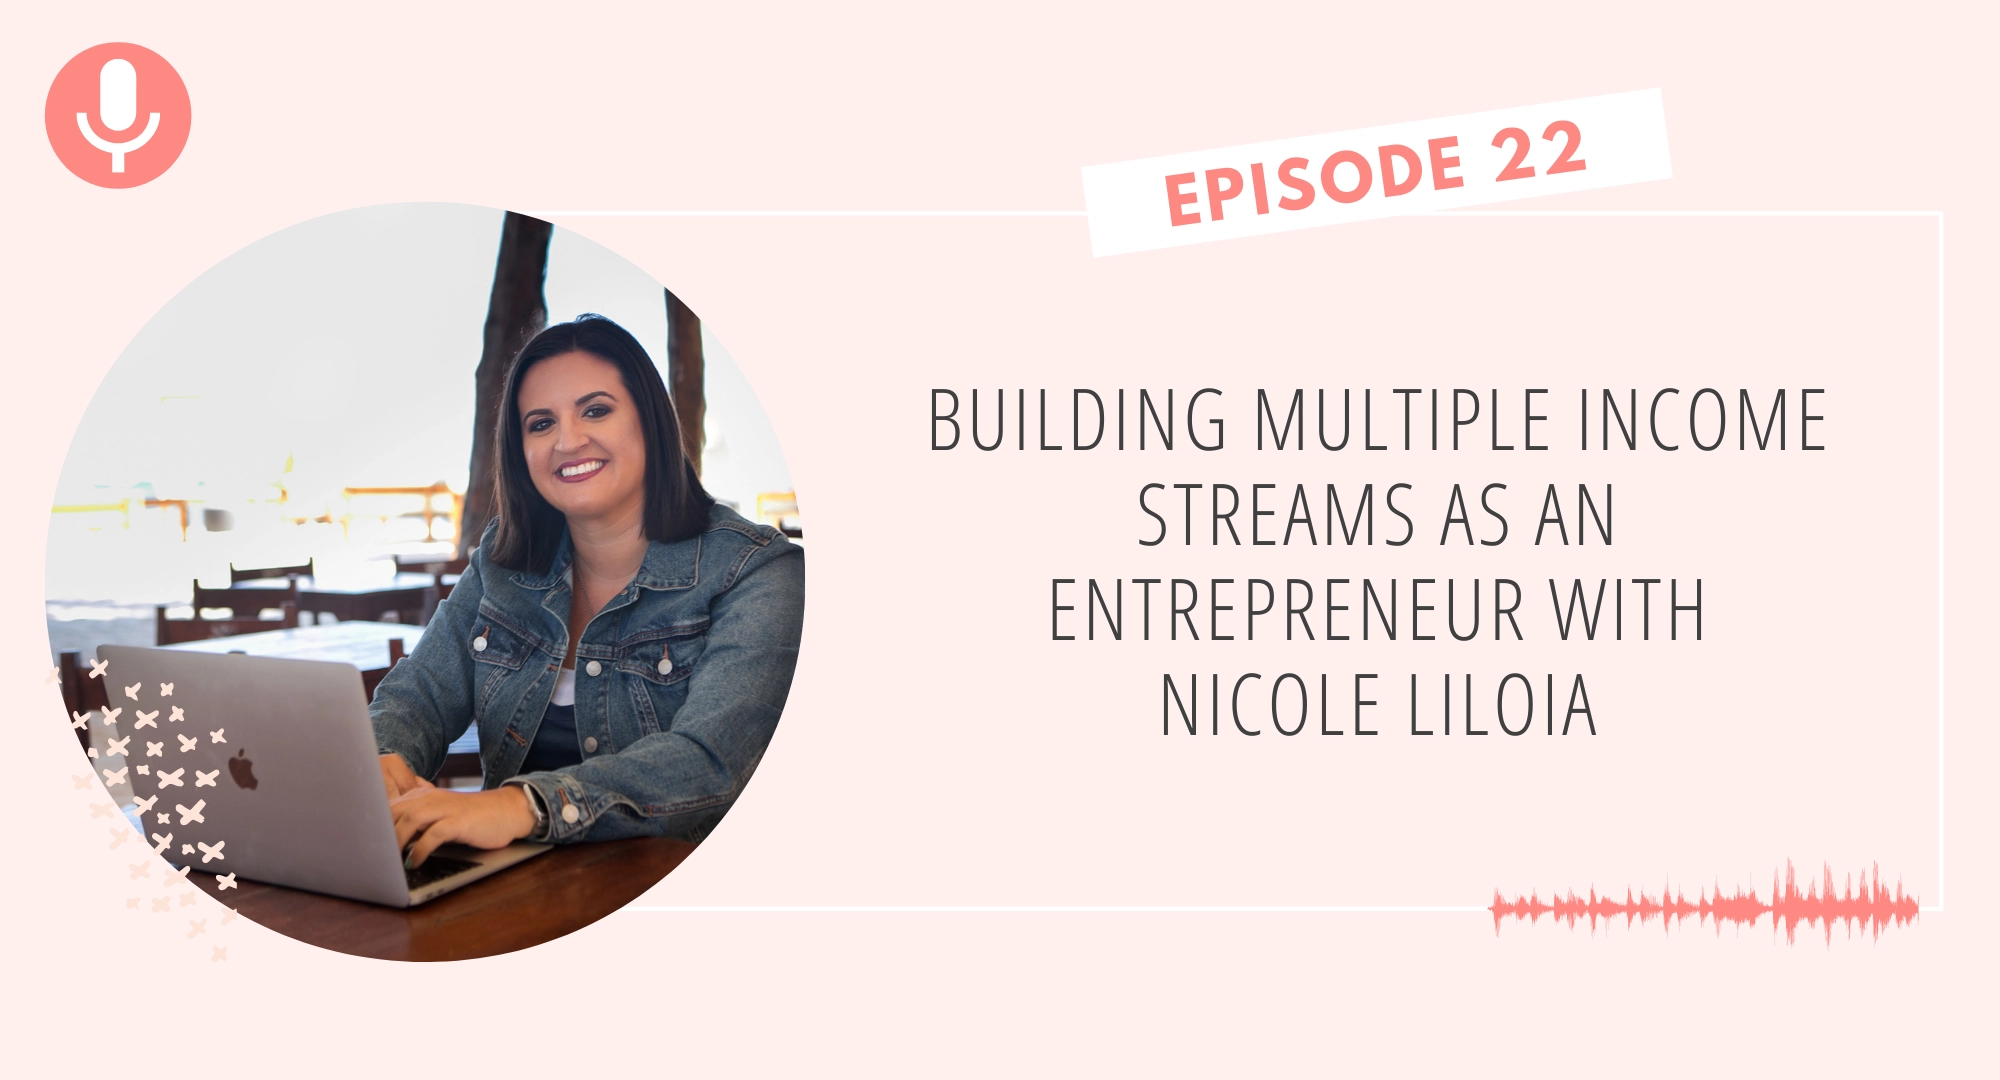 Building Multiple Income Streams as an Entrepreneur with Nicole Liloia